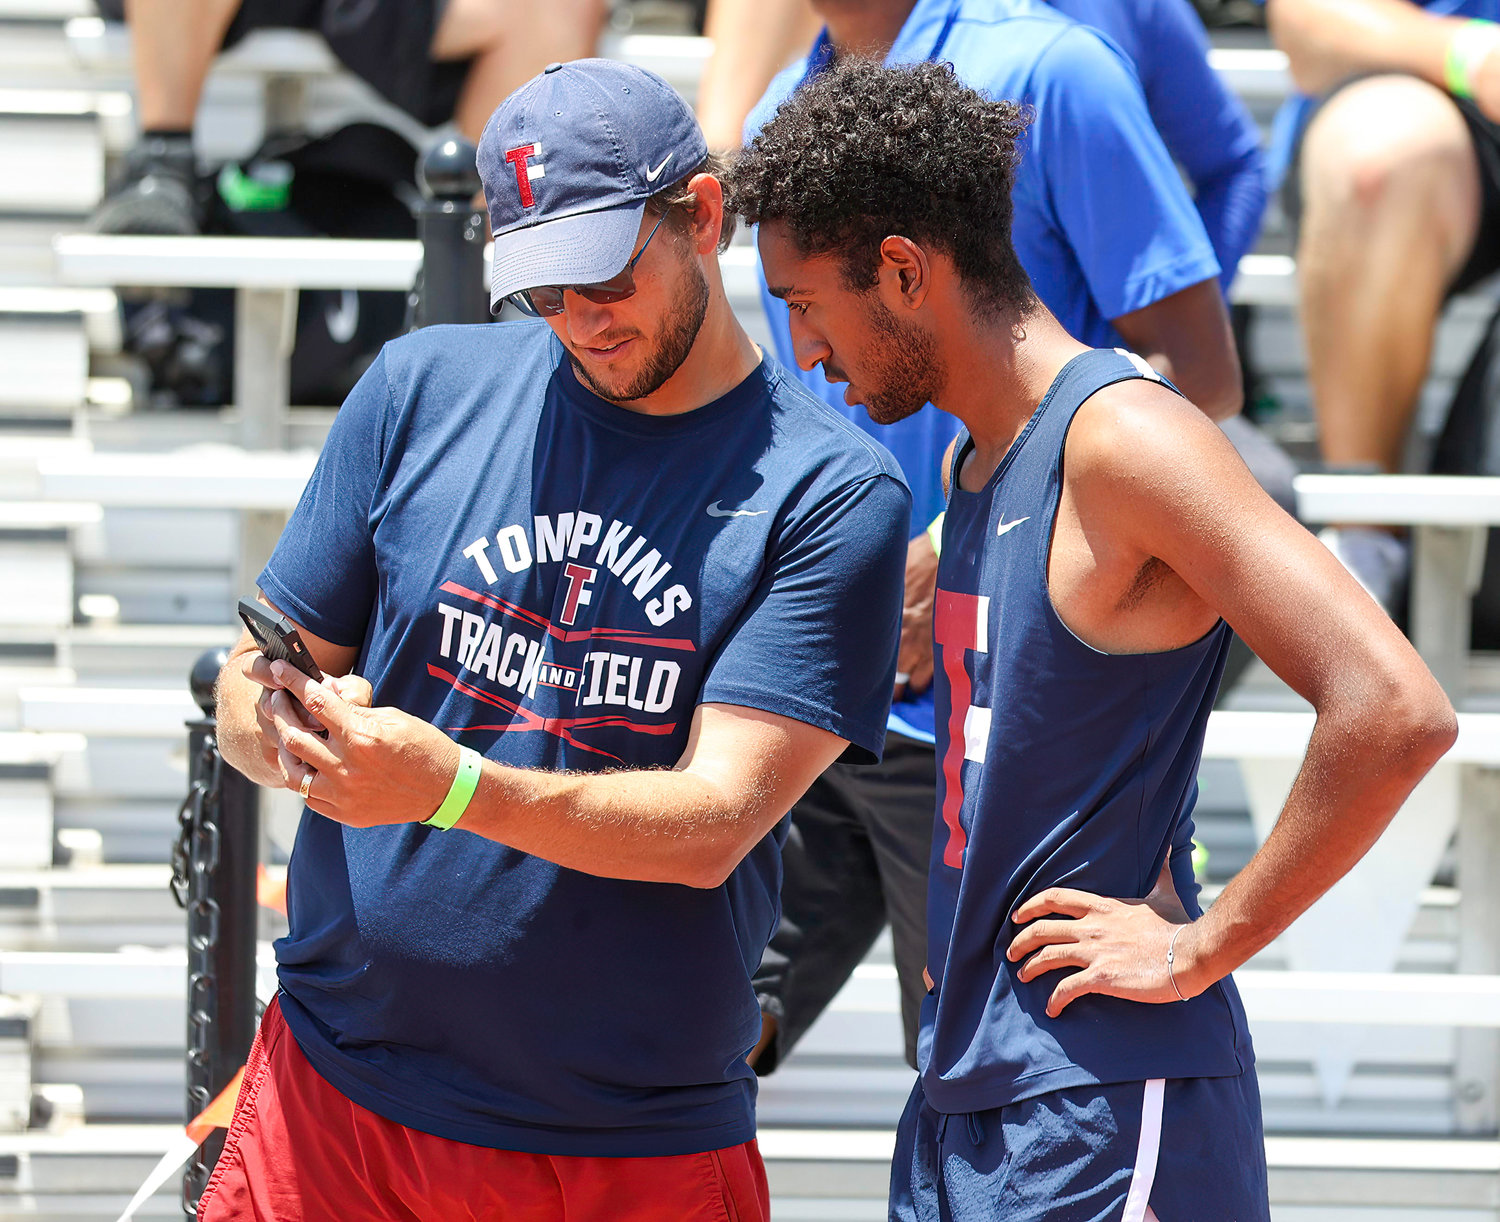 Matthew Kumar of Tompkins High School talks with his coach during the Class 6A boys pole vault event at the UIL State Track and Field Meet on May 14, 2022 in Austin, Texas. Kumar earned a gold medal with a jump of 16 feet, 3 inches.